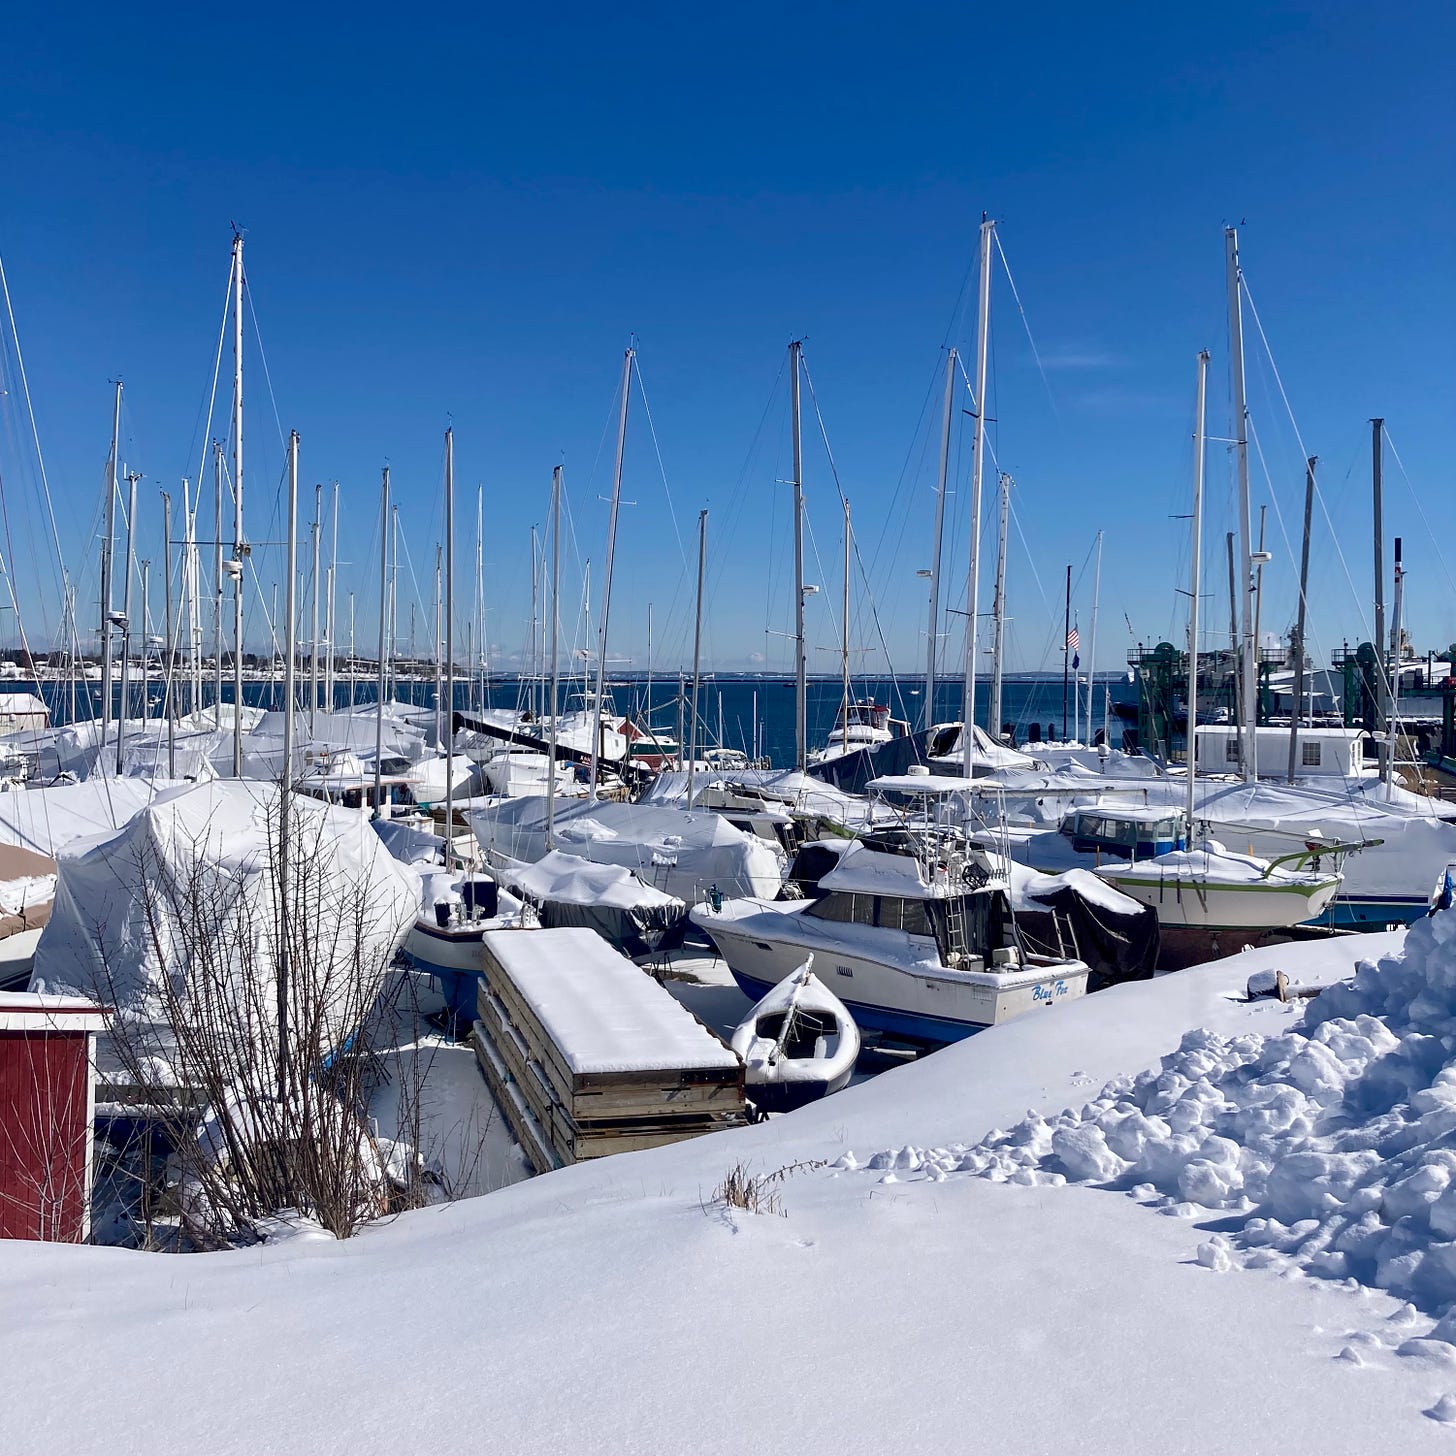 A group of boats on land in snow.